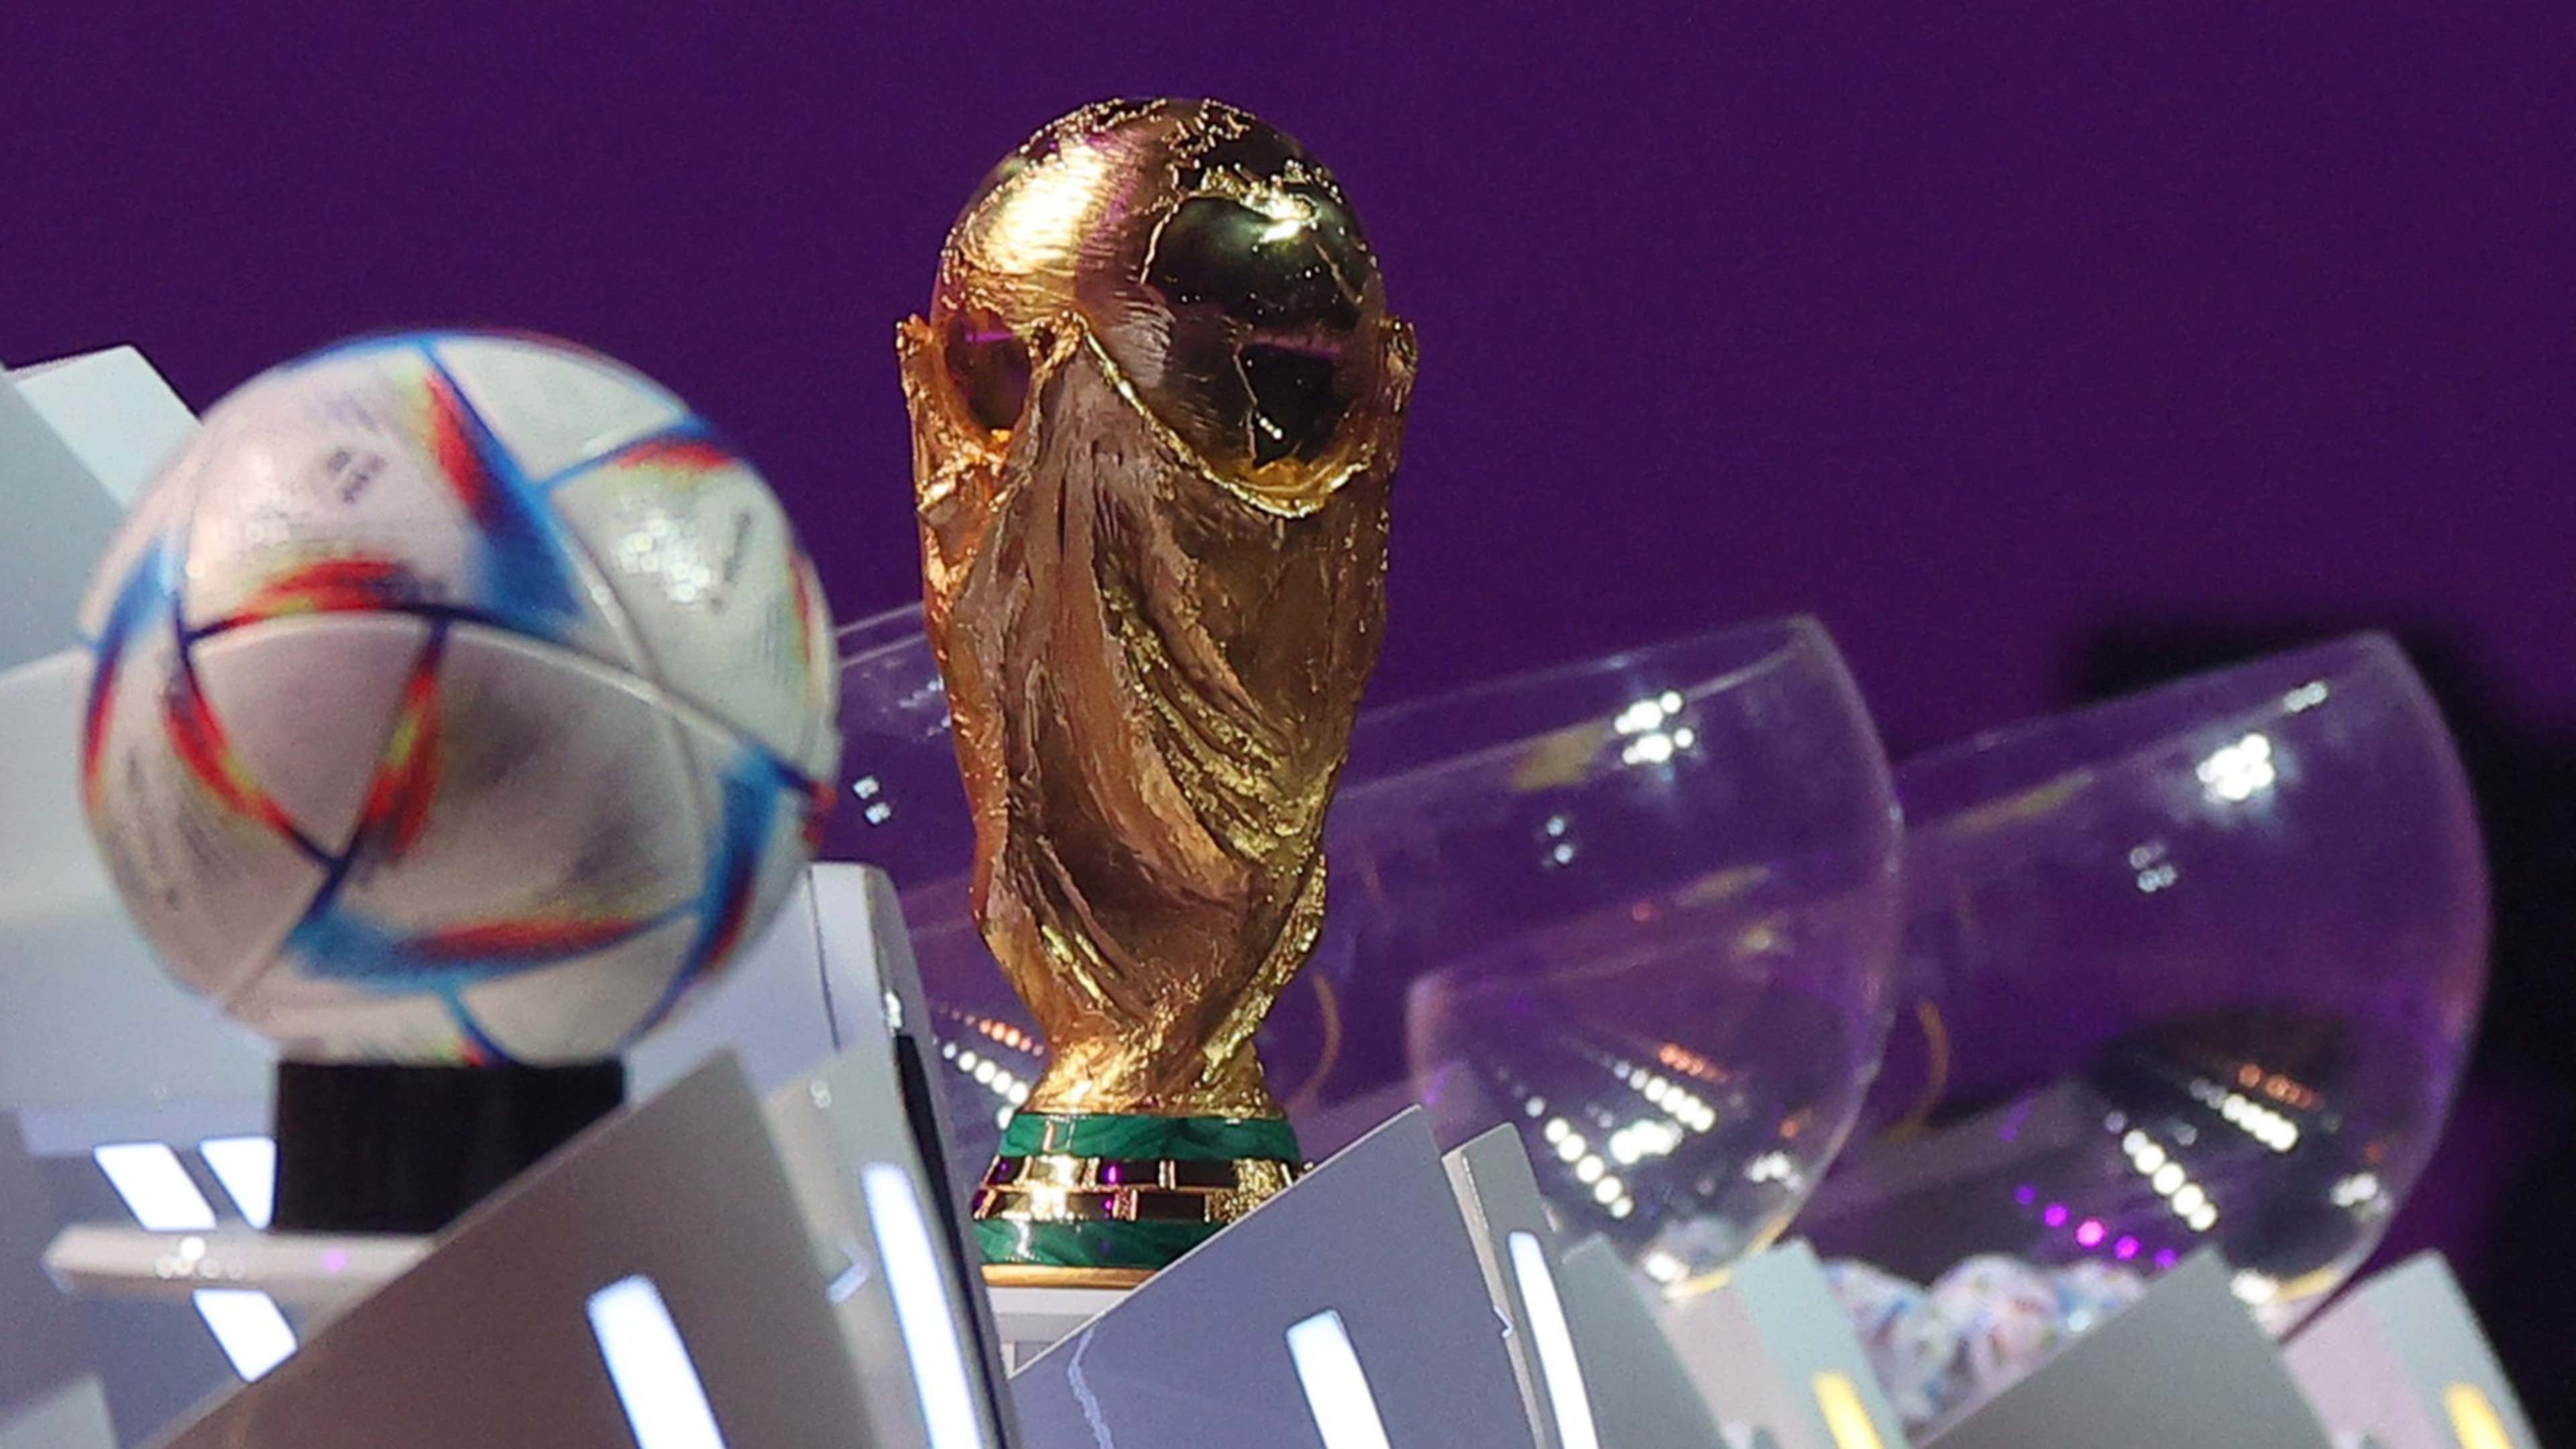 World Cup 2022 countdown: When is it, where is it and who has qualified?